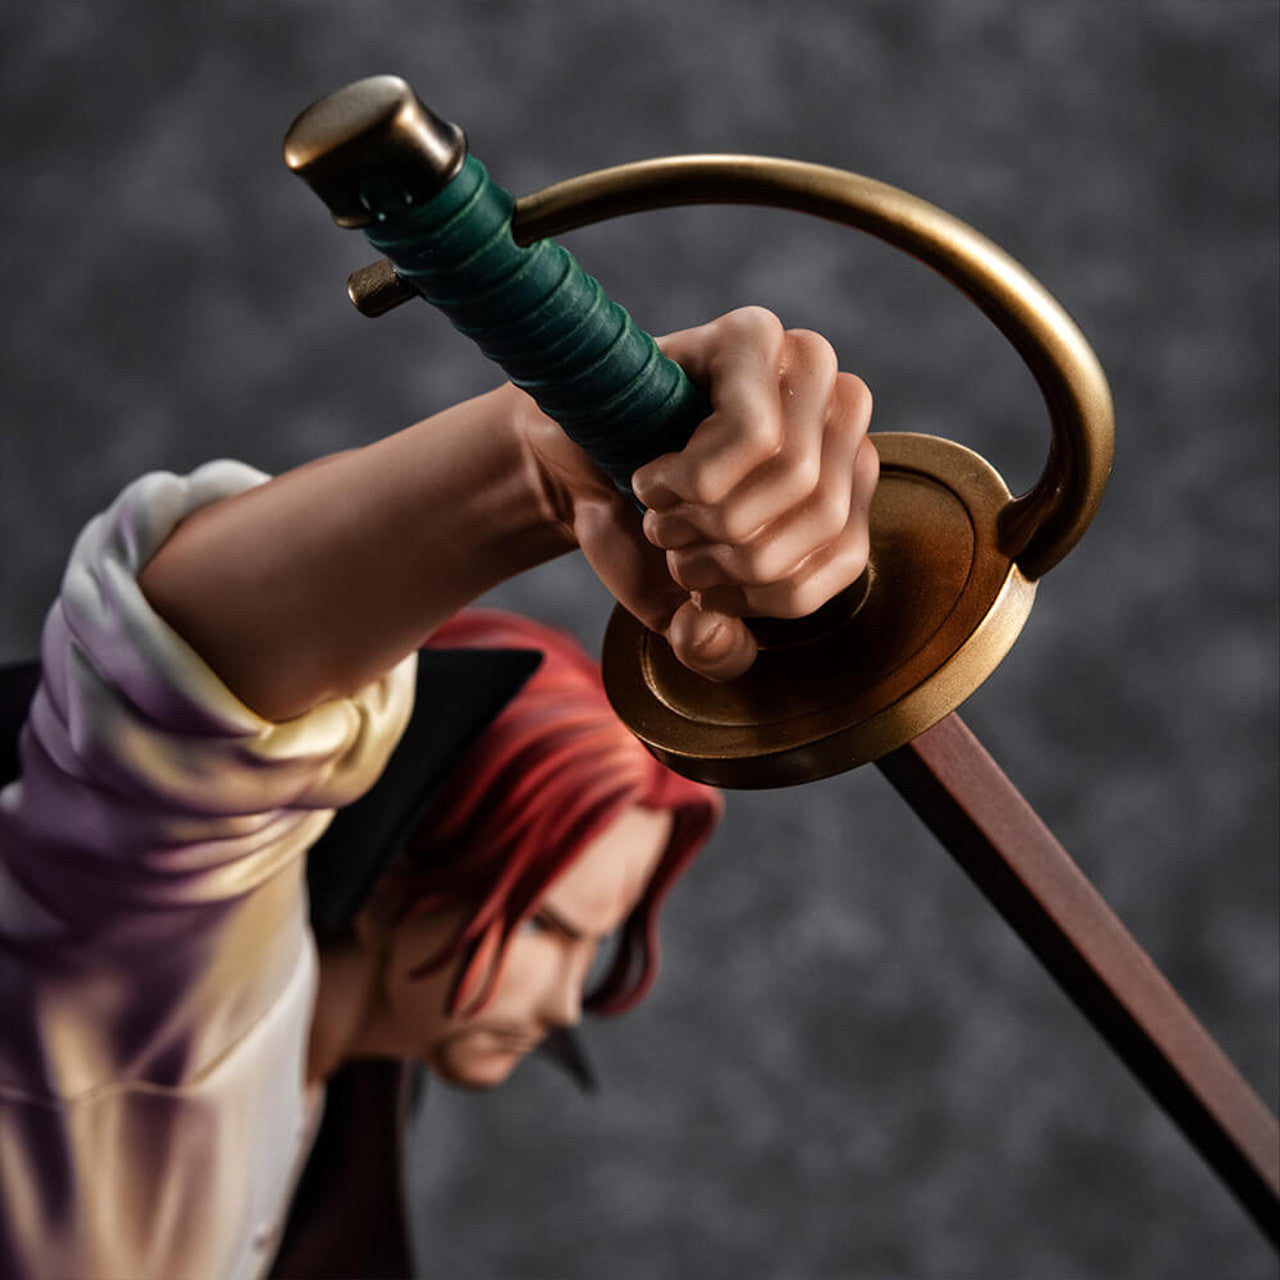 Portrait.Of.Pirates “Playback Memories” “Red-haired” Shanks